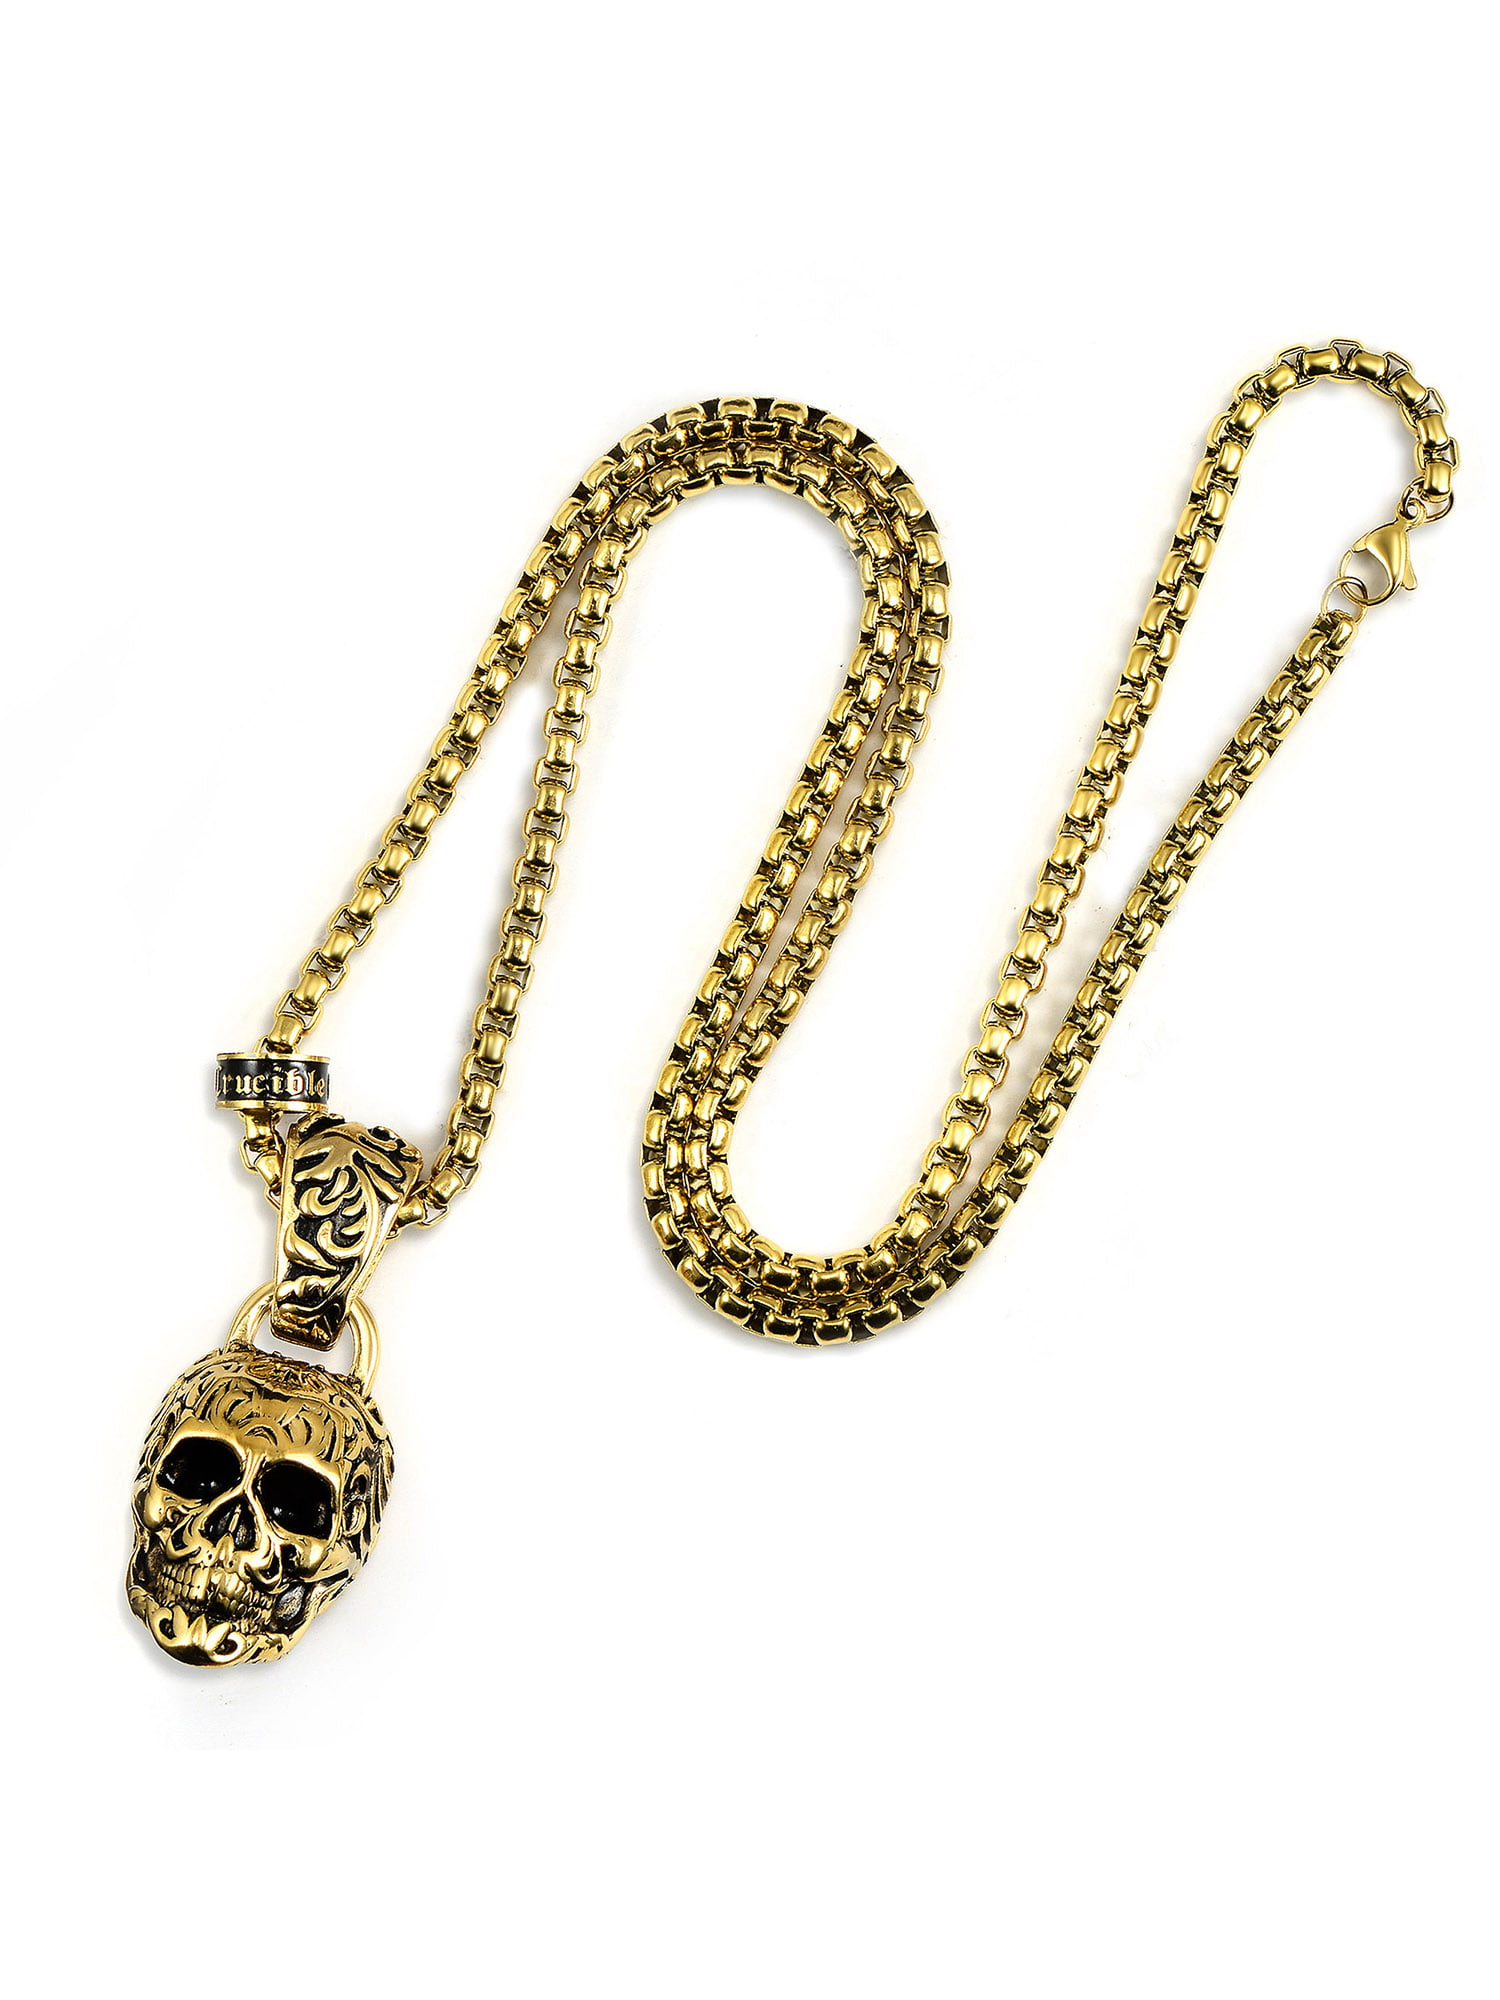 Stainless Steel Polished and Antiqued Skull Necklace